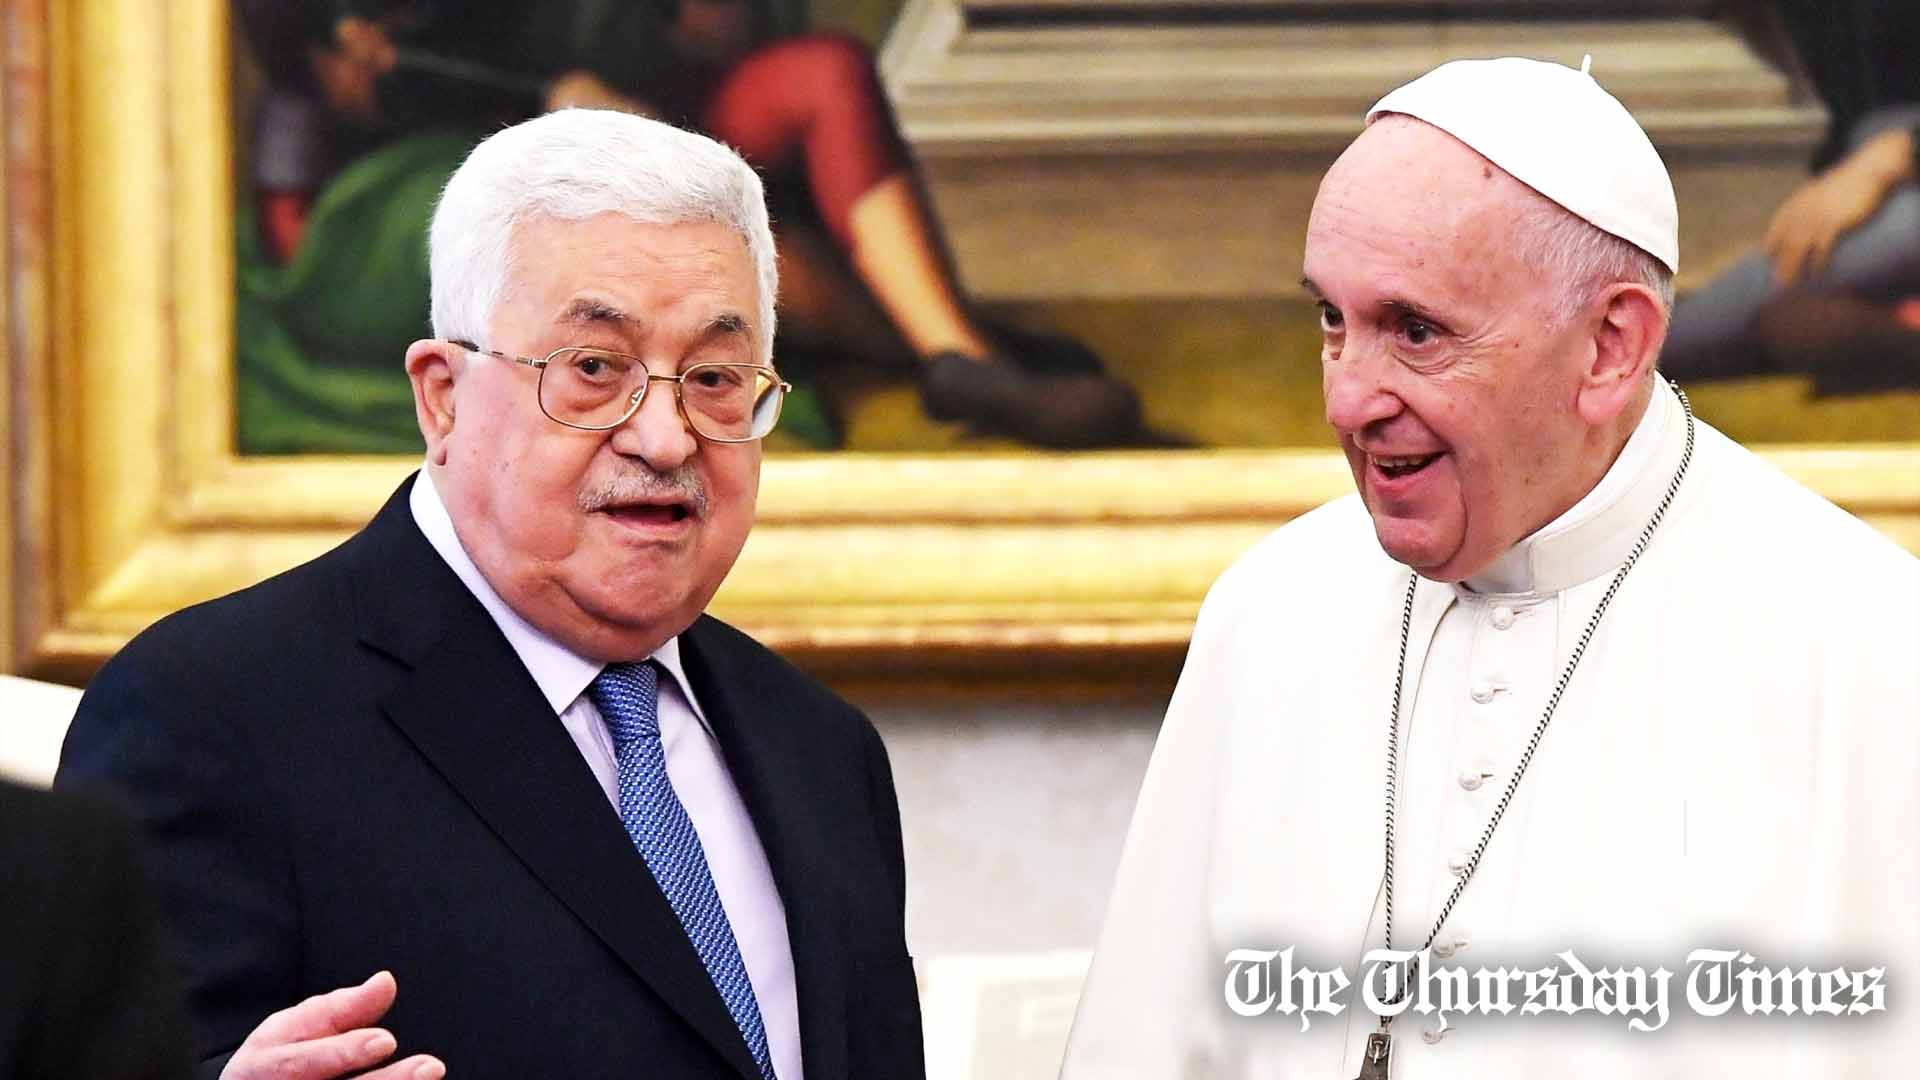 Pope Francis meets President of the State of Palestine and the Palestinian National Authority Mahmoud Abbas at the Palazzo Apostolico on December 3, 2018 in Vatican City. — POOL/VATICAN